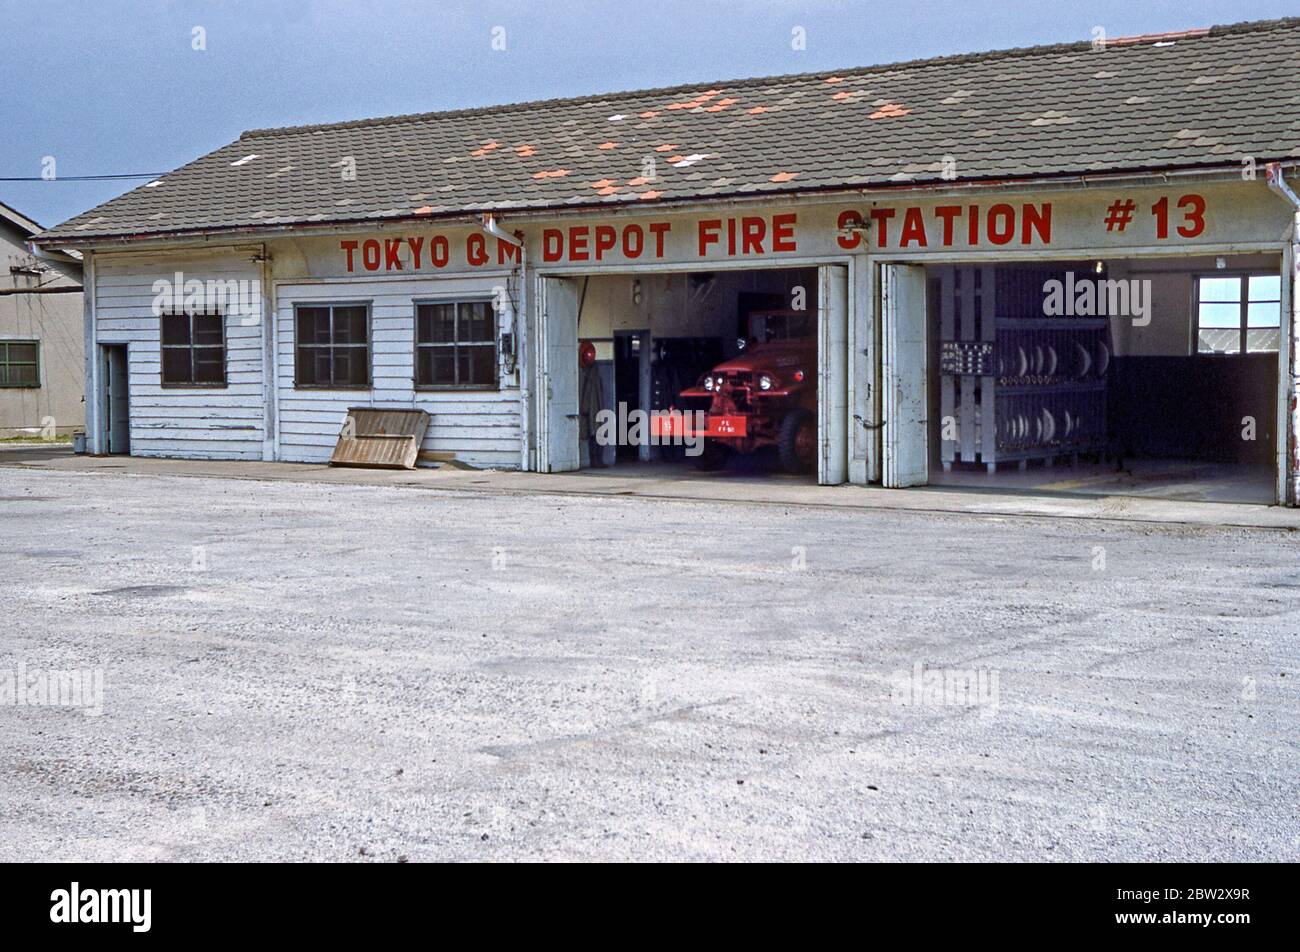 The Tokyo US Army Quartermasters Depot Fire Station No 13, Tokyo, Japan 1955. The Quartermasters Group was part of the US Army's 40th Infantry Division. The 40th Infantry Division ('Sunshine Division') is part of the US Army.  It saw active service in the Korean War (1950–53). After training in Japan, it moved to Korea in January 1952, participating in the battles of Sandbag Castle and Heartbreak Ridge. The division remained in Korea until May 1954. In 1953 their HQ moved to Tokyo, then to Yokohama and finally in October to Camp Zama, southwest of Tokyo. Stock Photo